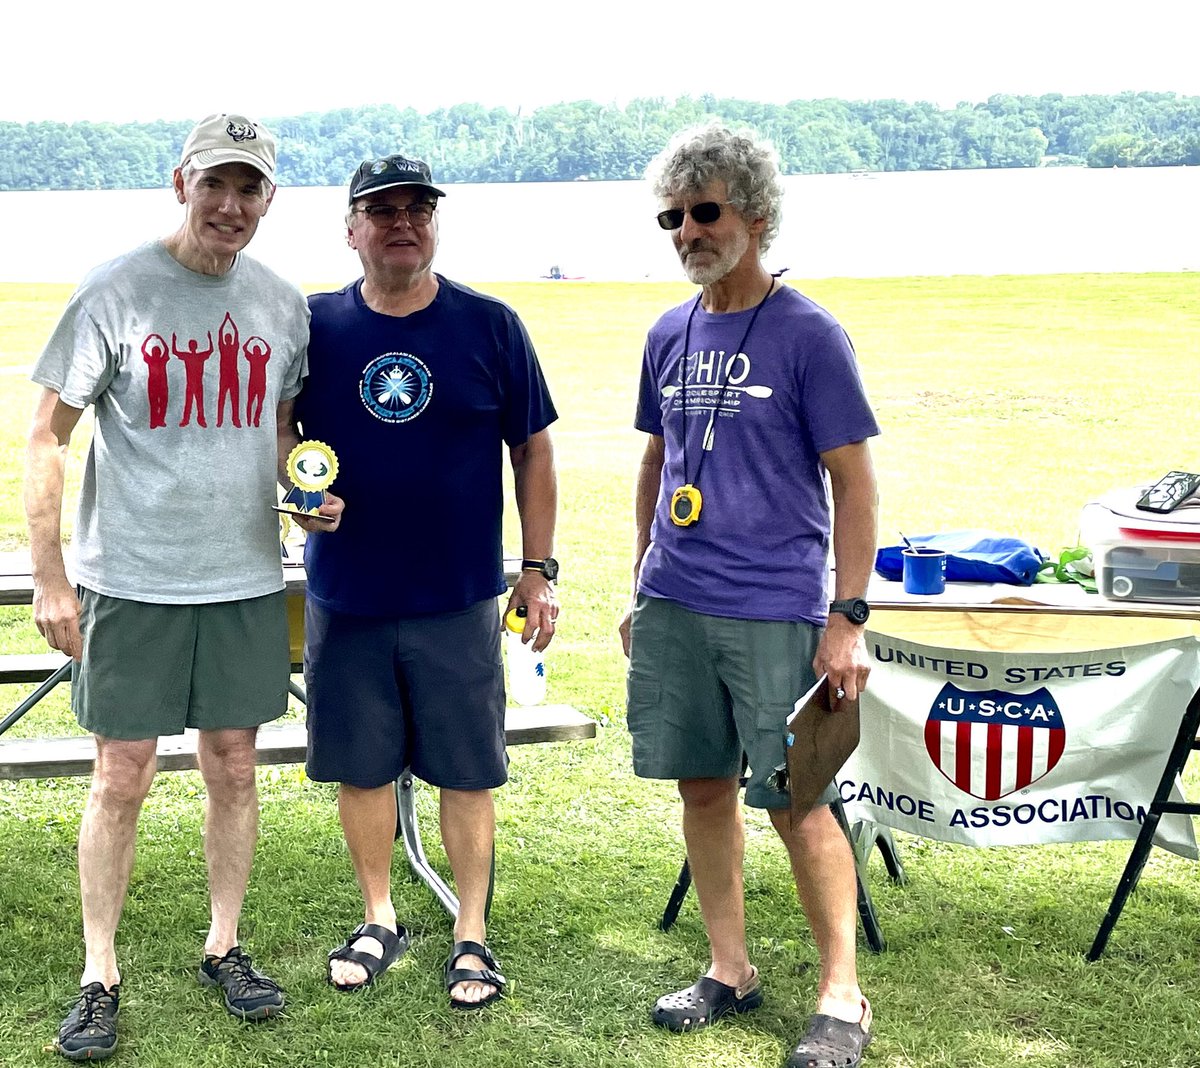 Paddled in the Lake Cowan canoe/kayak race today. Good to catch up w fellow paddlers & support a good cause: Friends Caring for Cowan Lake State Park - cowanlakestatepark.com